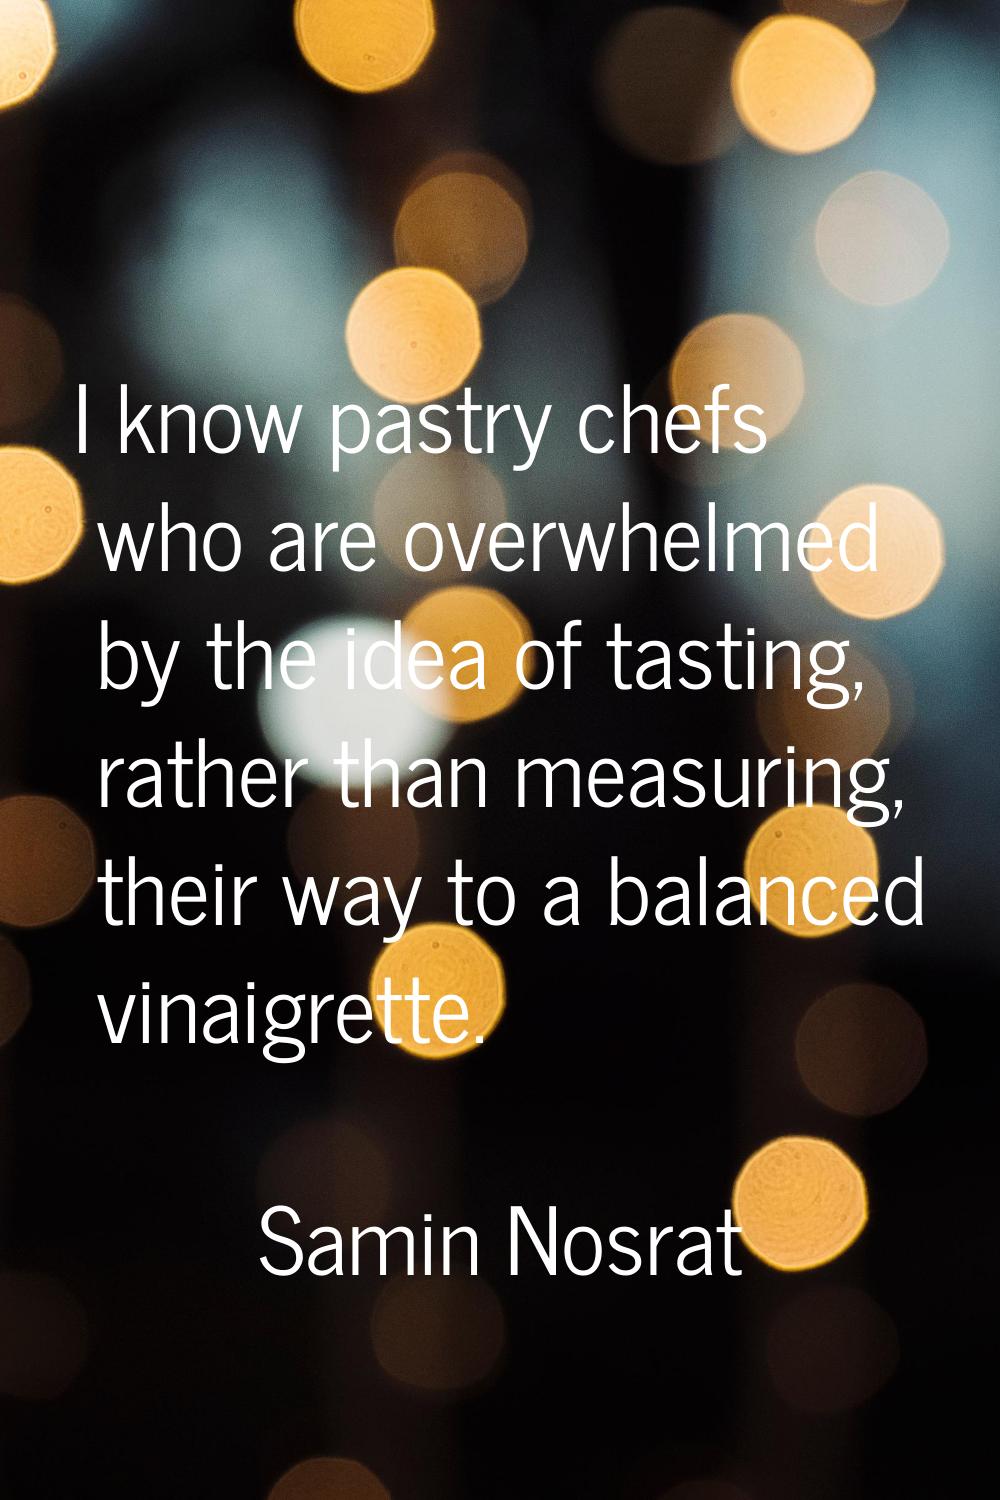 I know pastry chefs who are overwhelmed by the idea of tasting, rather than measuring, their way to